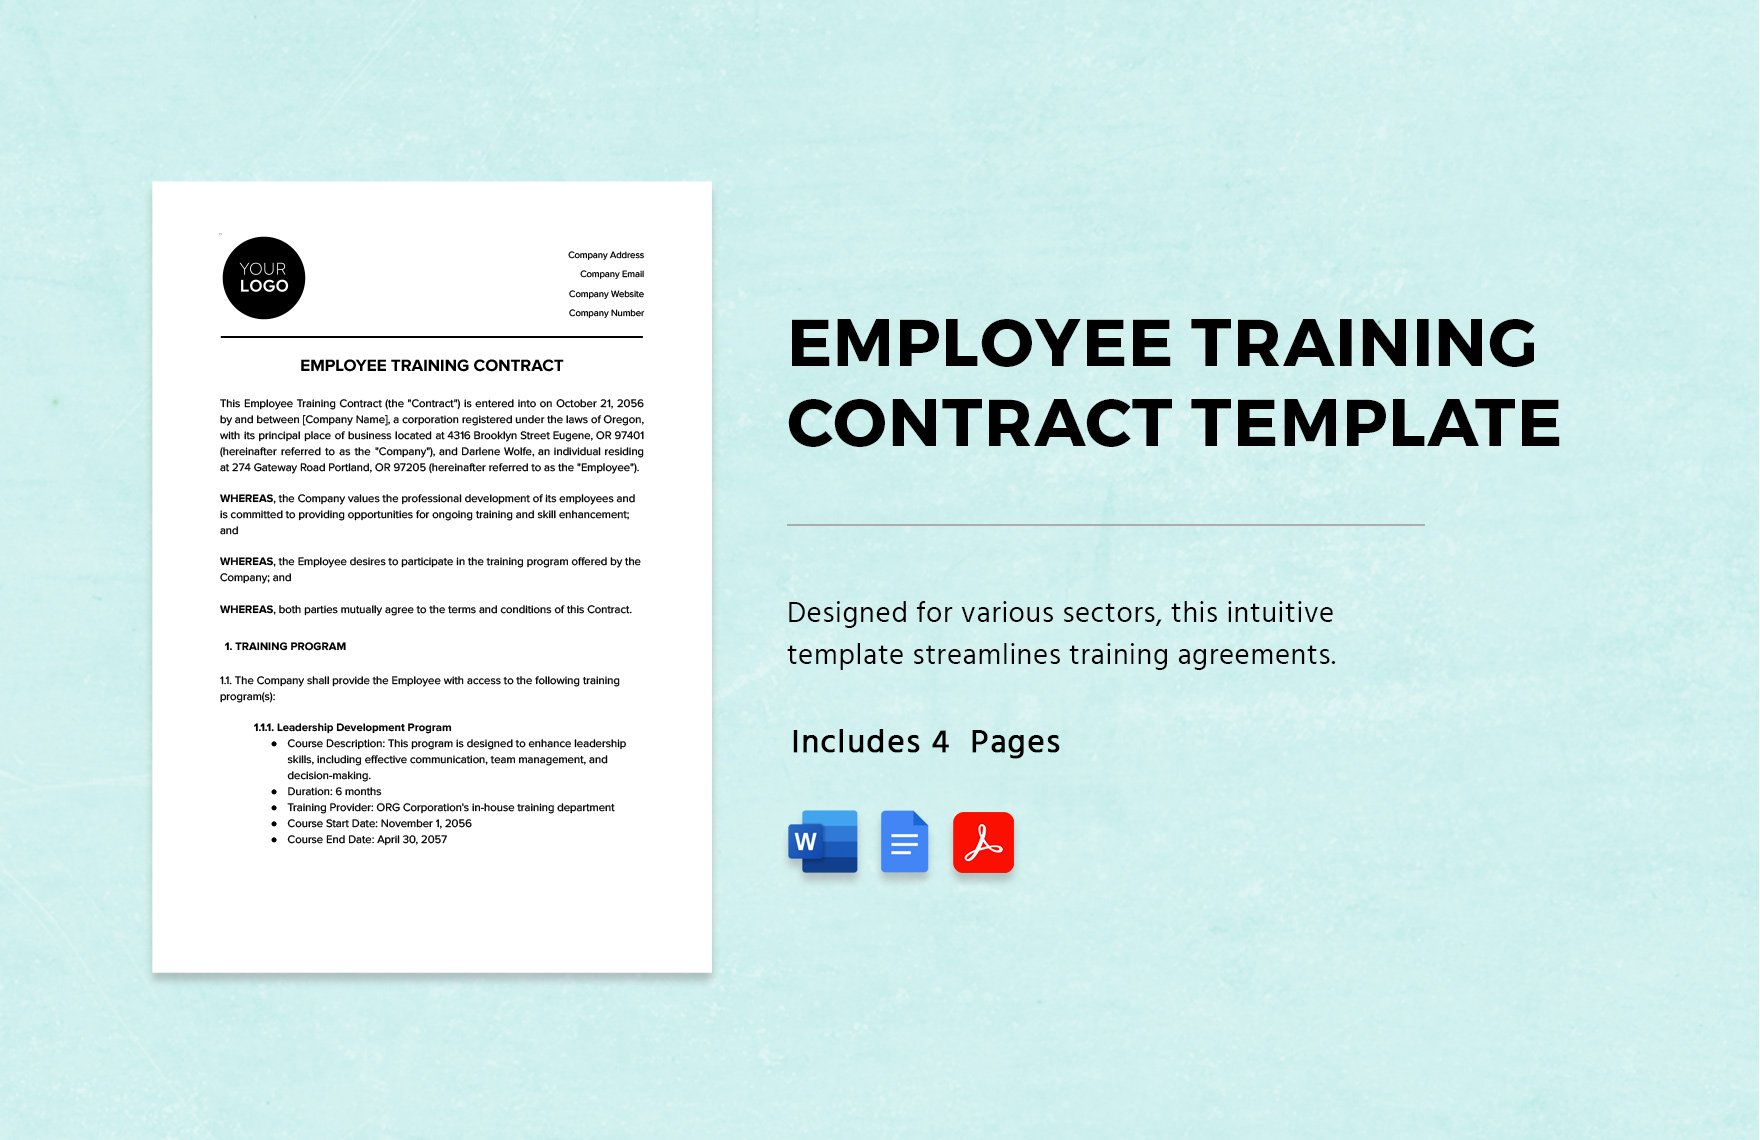 Employee Training Contract HR Template in Word, Google Docs, PDF